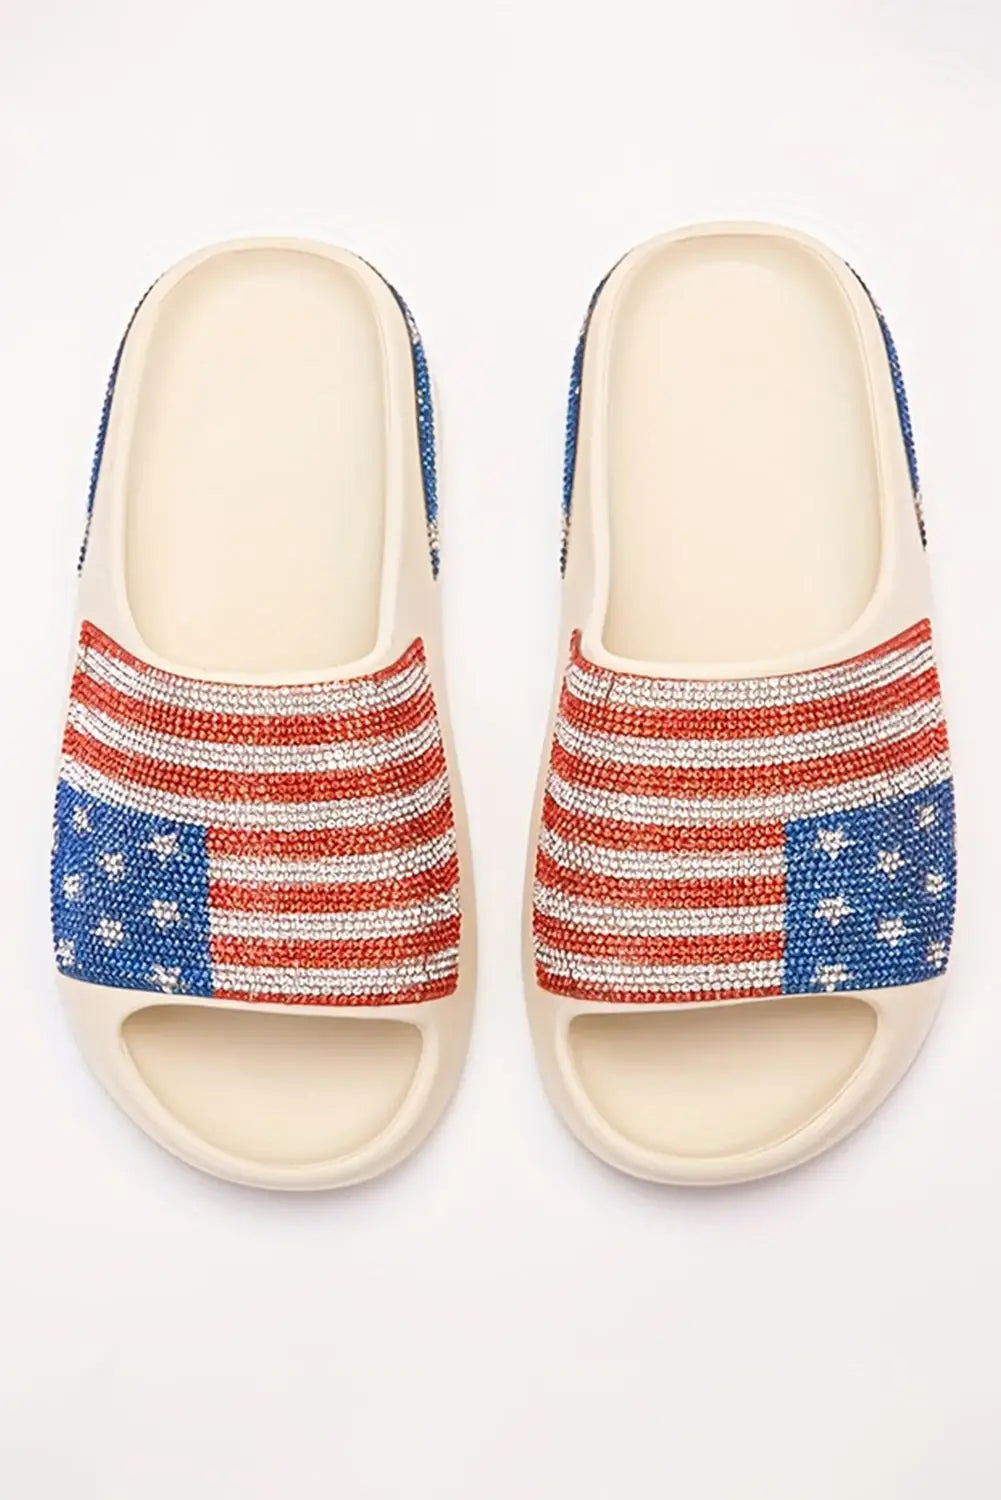 White rhinestone american flag thick sole slippers - shoes & bags/slippers